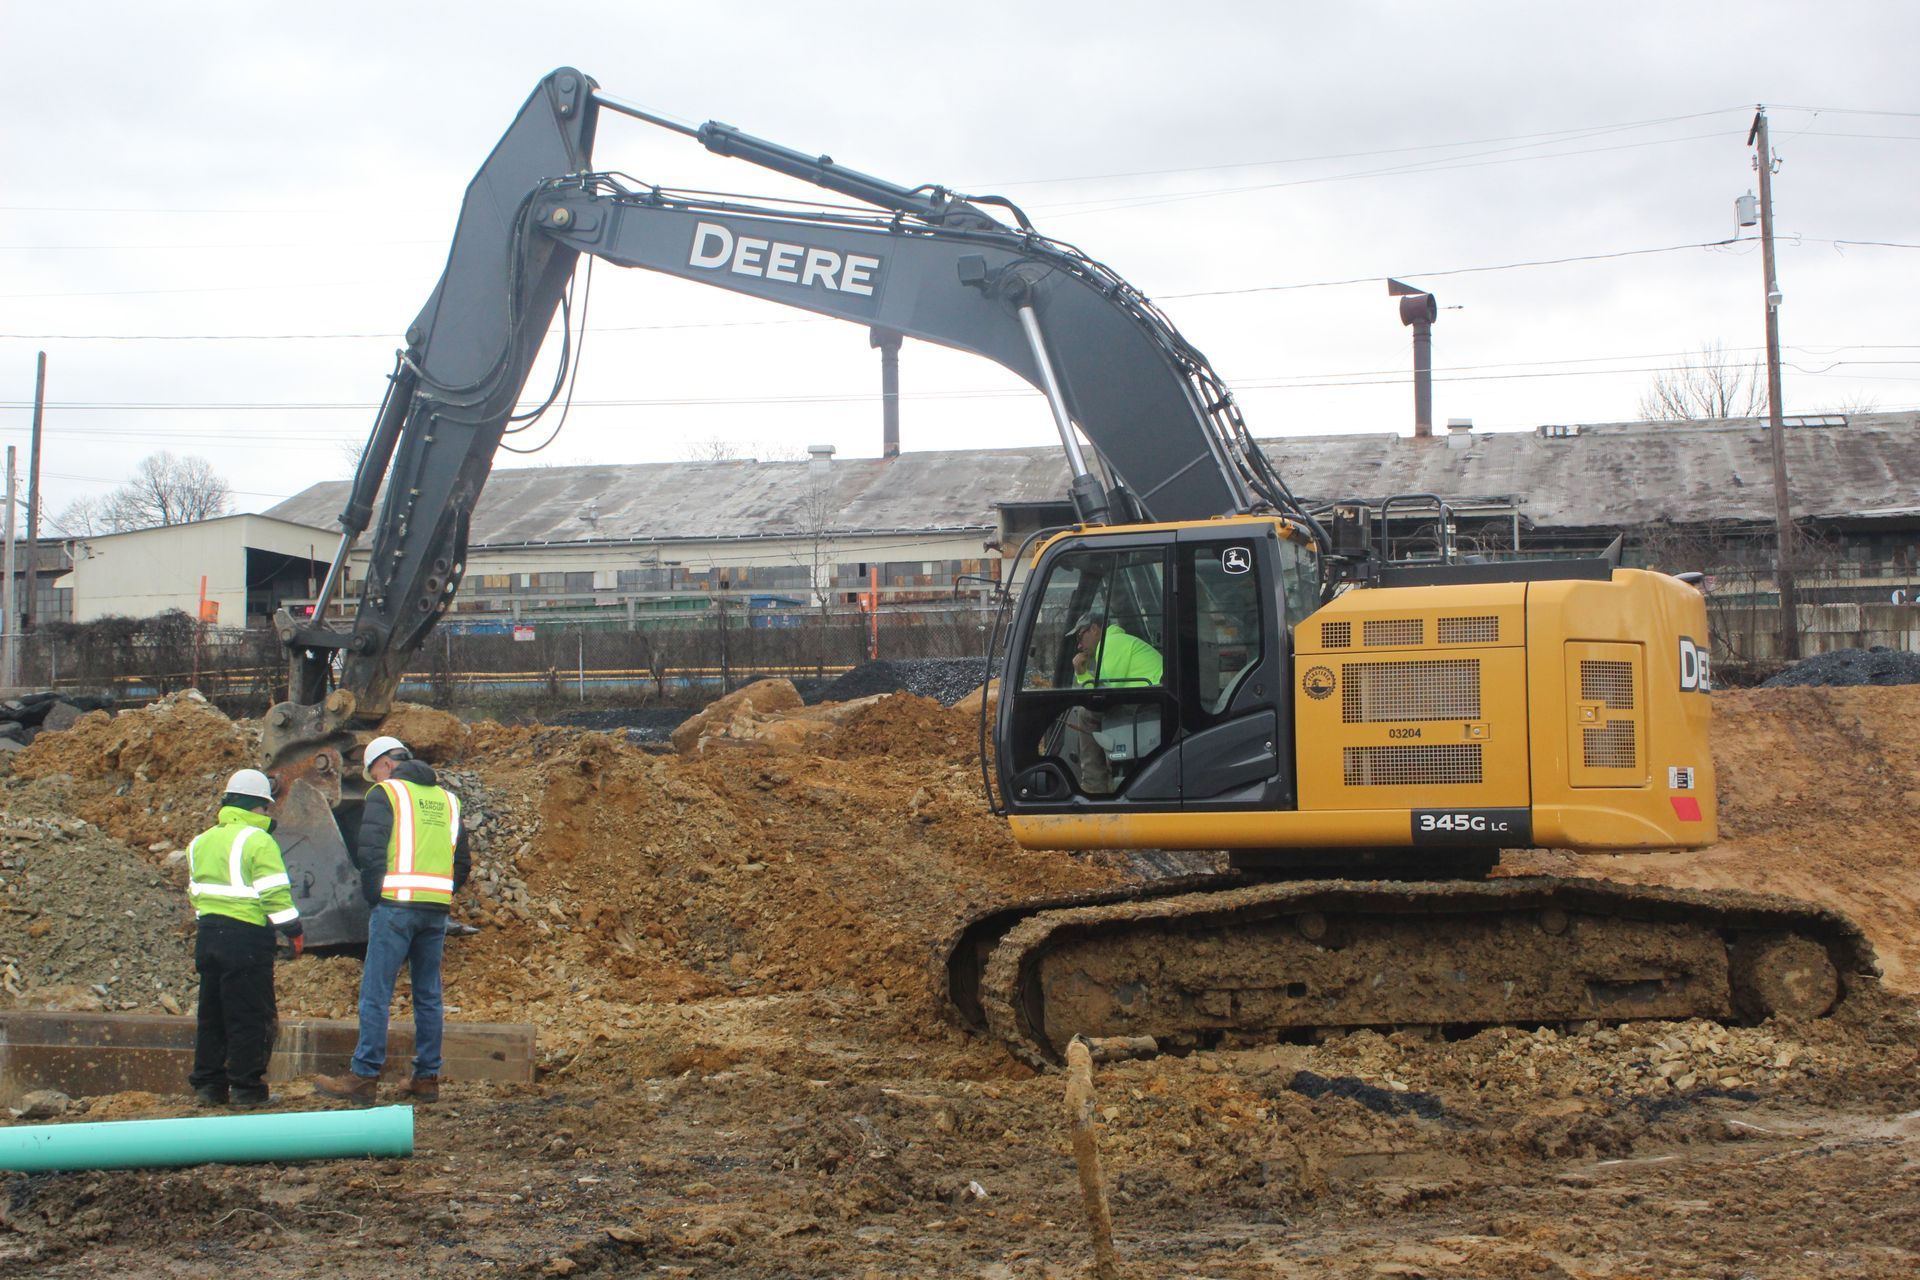 A deere excavator is being used on a construction site